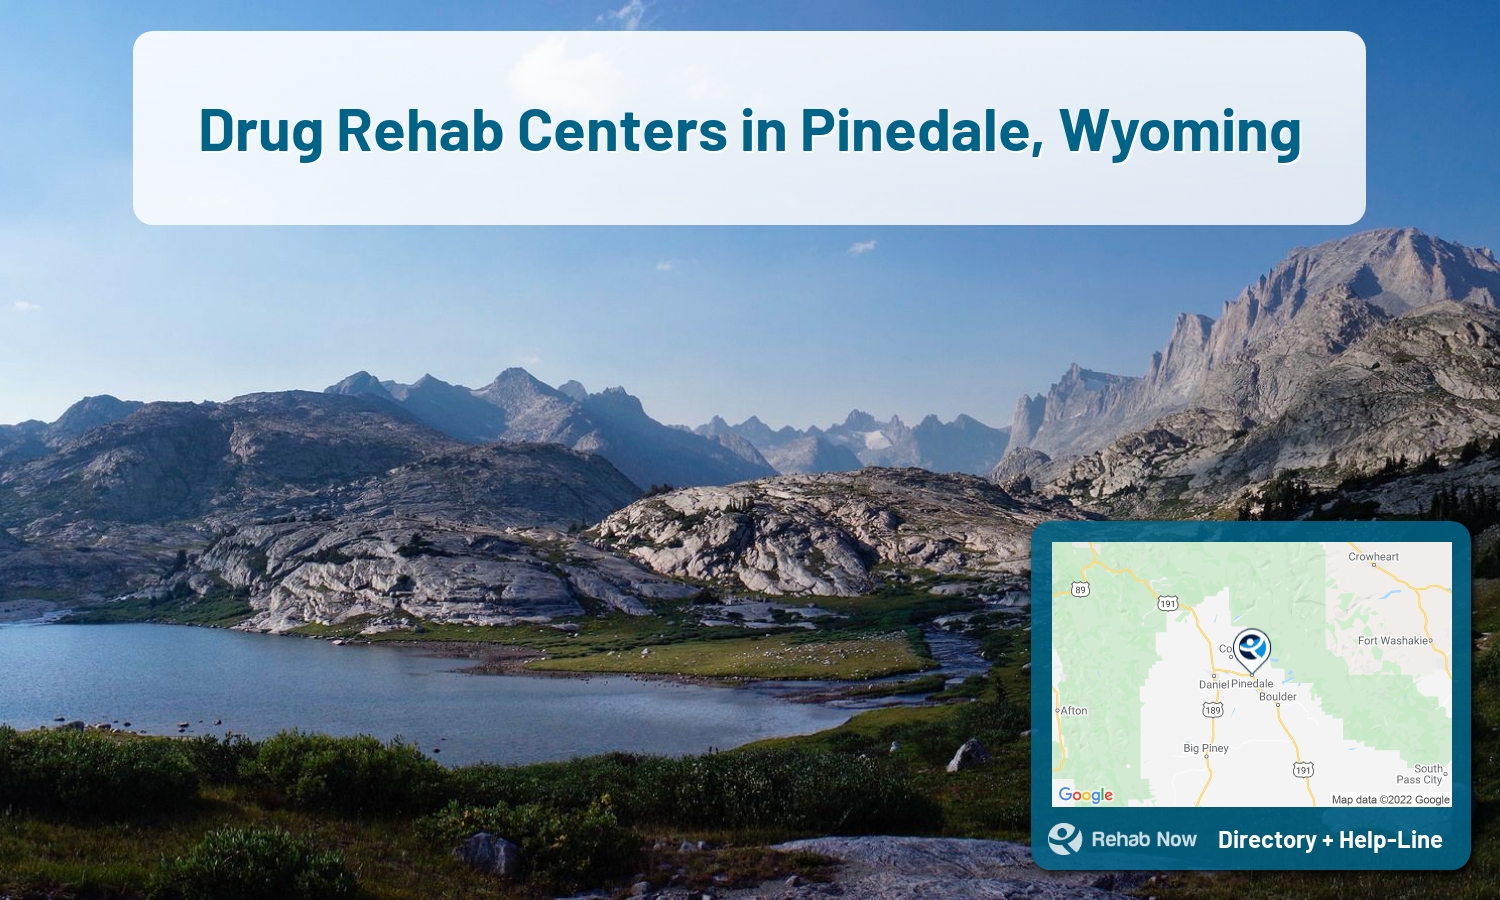 Let our expert counselors help find the best addiction treatment in Pinedale, Wyoming now with a free call to our hotline.